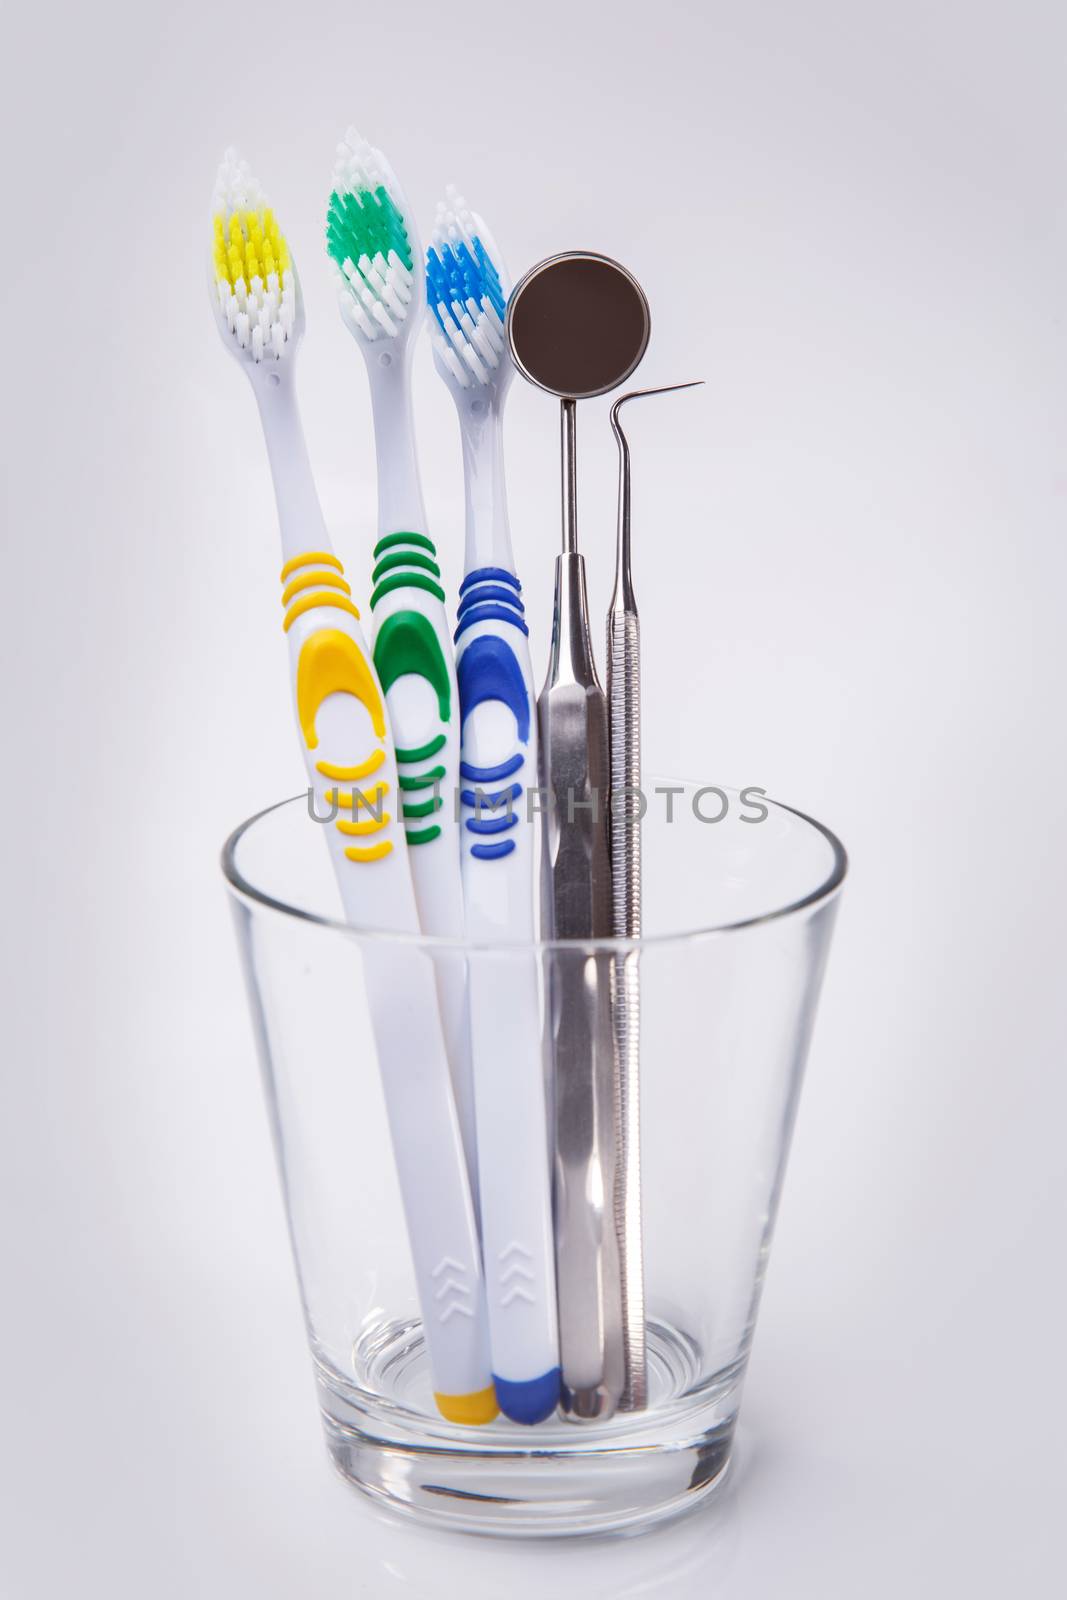 Dental. Toothbrushes on a white background